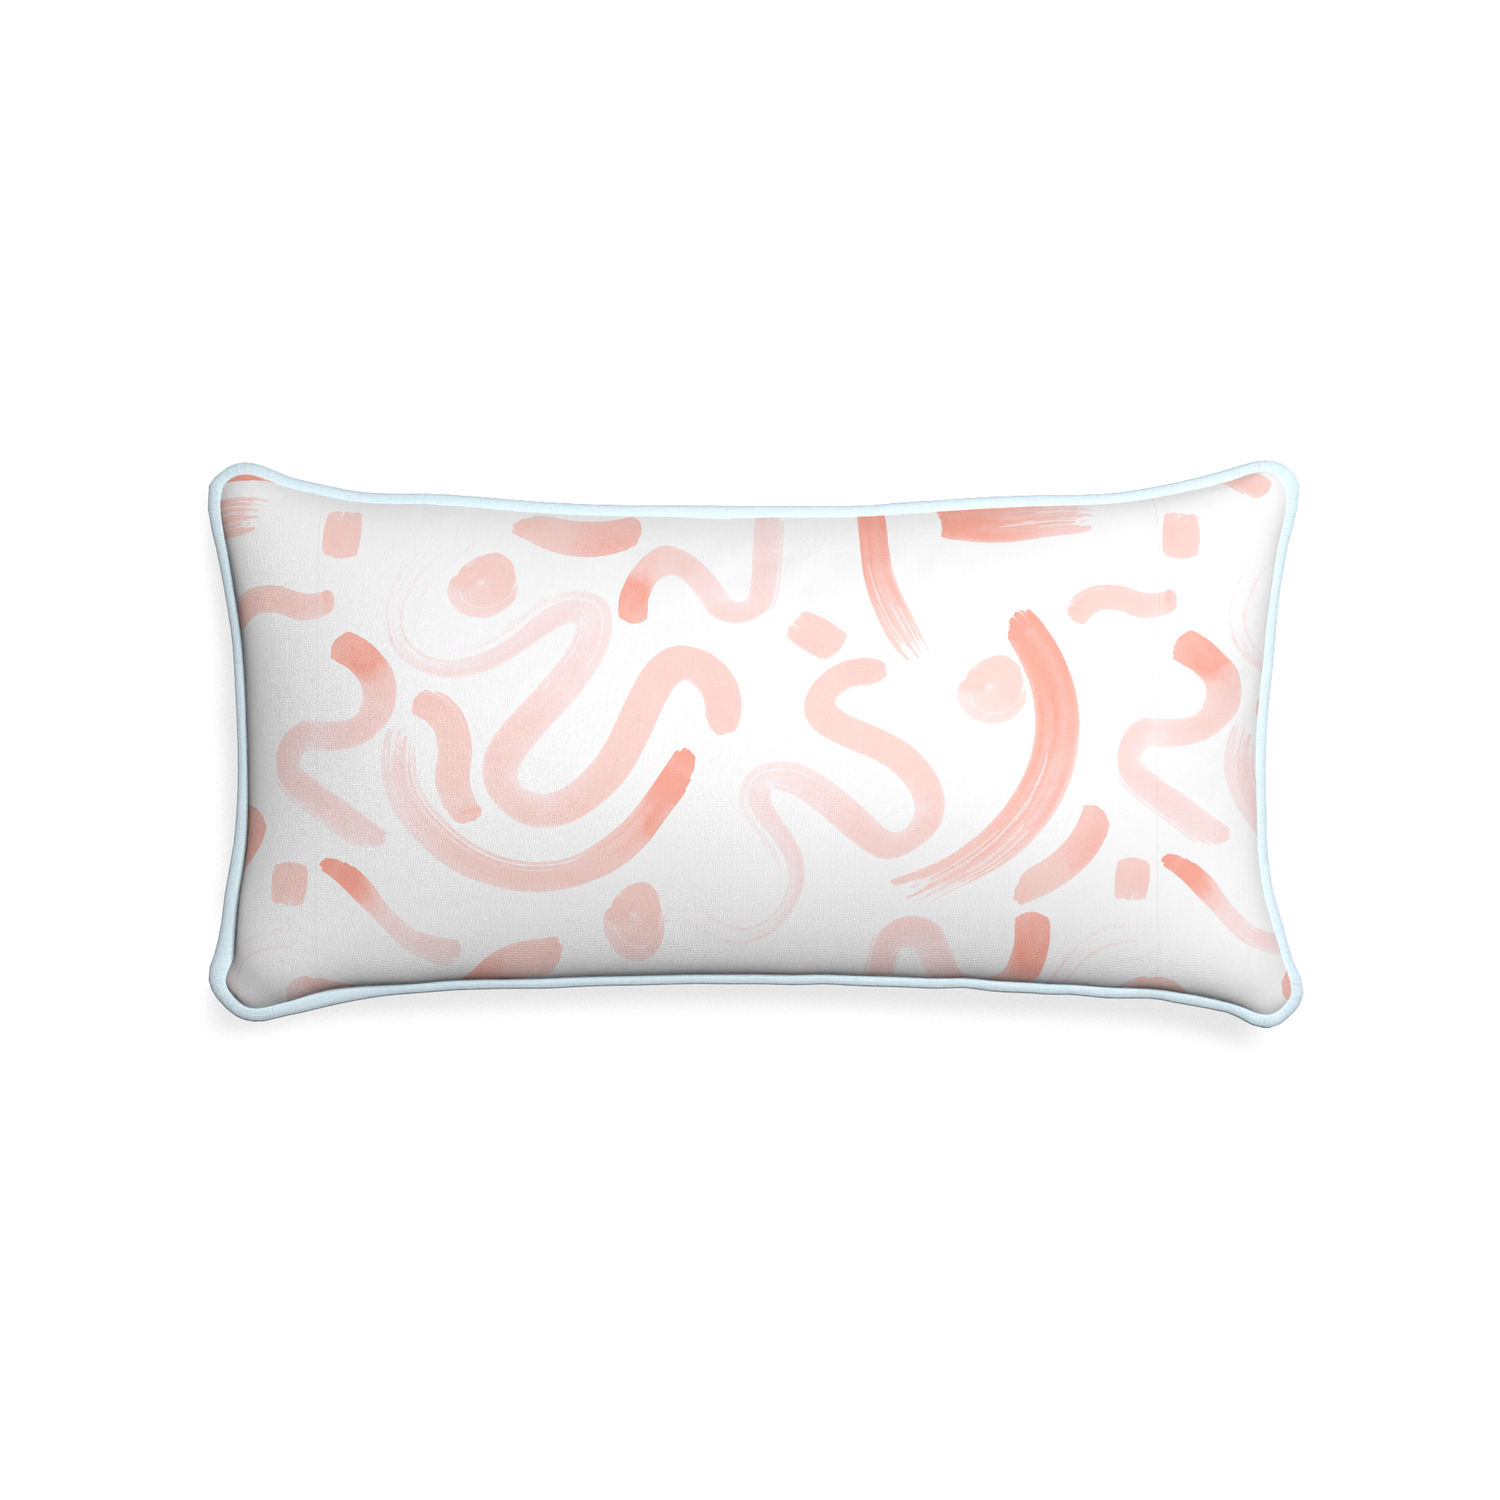 Midi-lumbar hockney pink custom pink graphicpillow with powder piping on white background